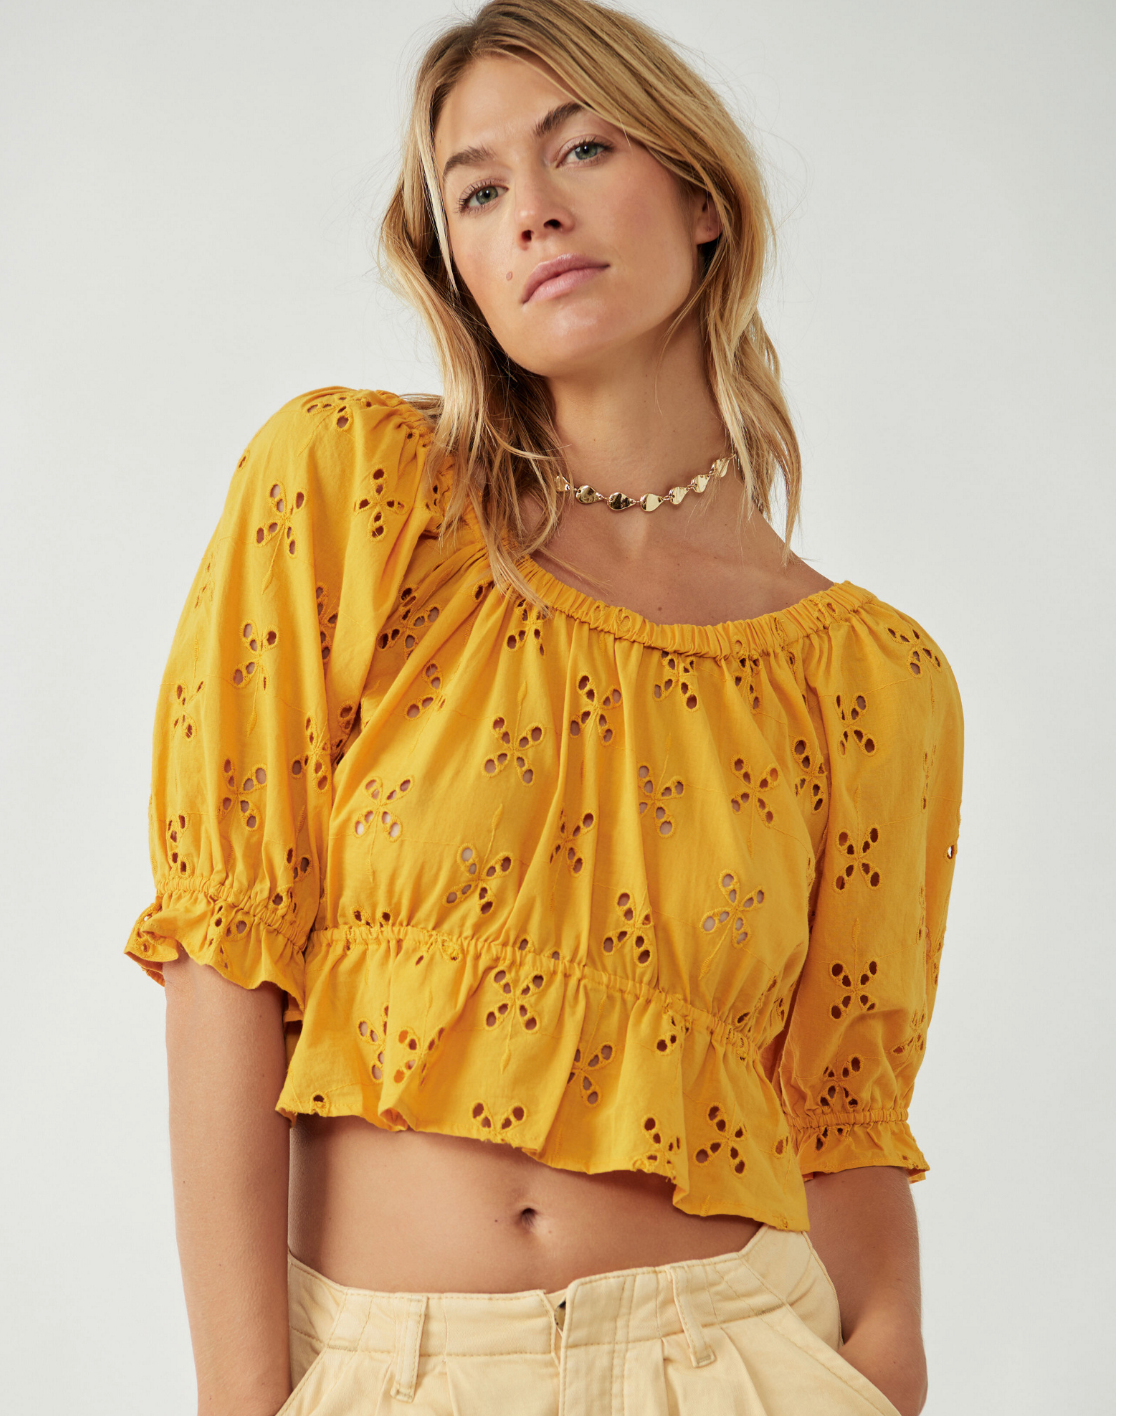 Free People Gold Lace Eyelet Cropped Gardenia Top with Short Puff Sleeves